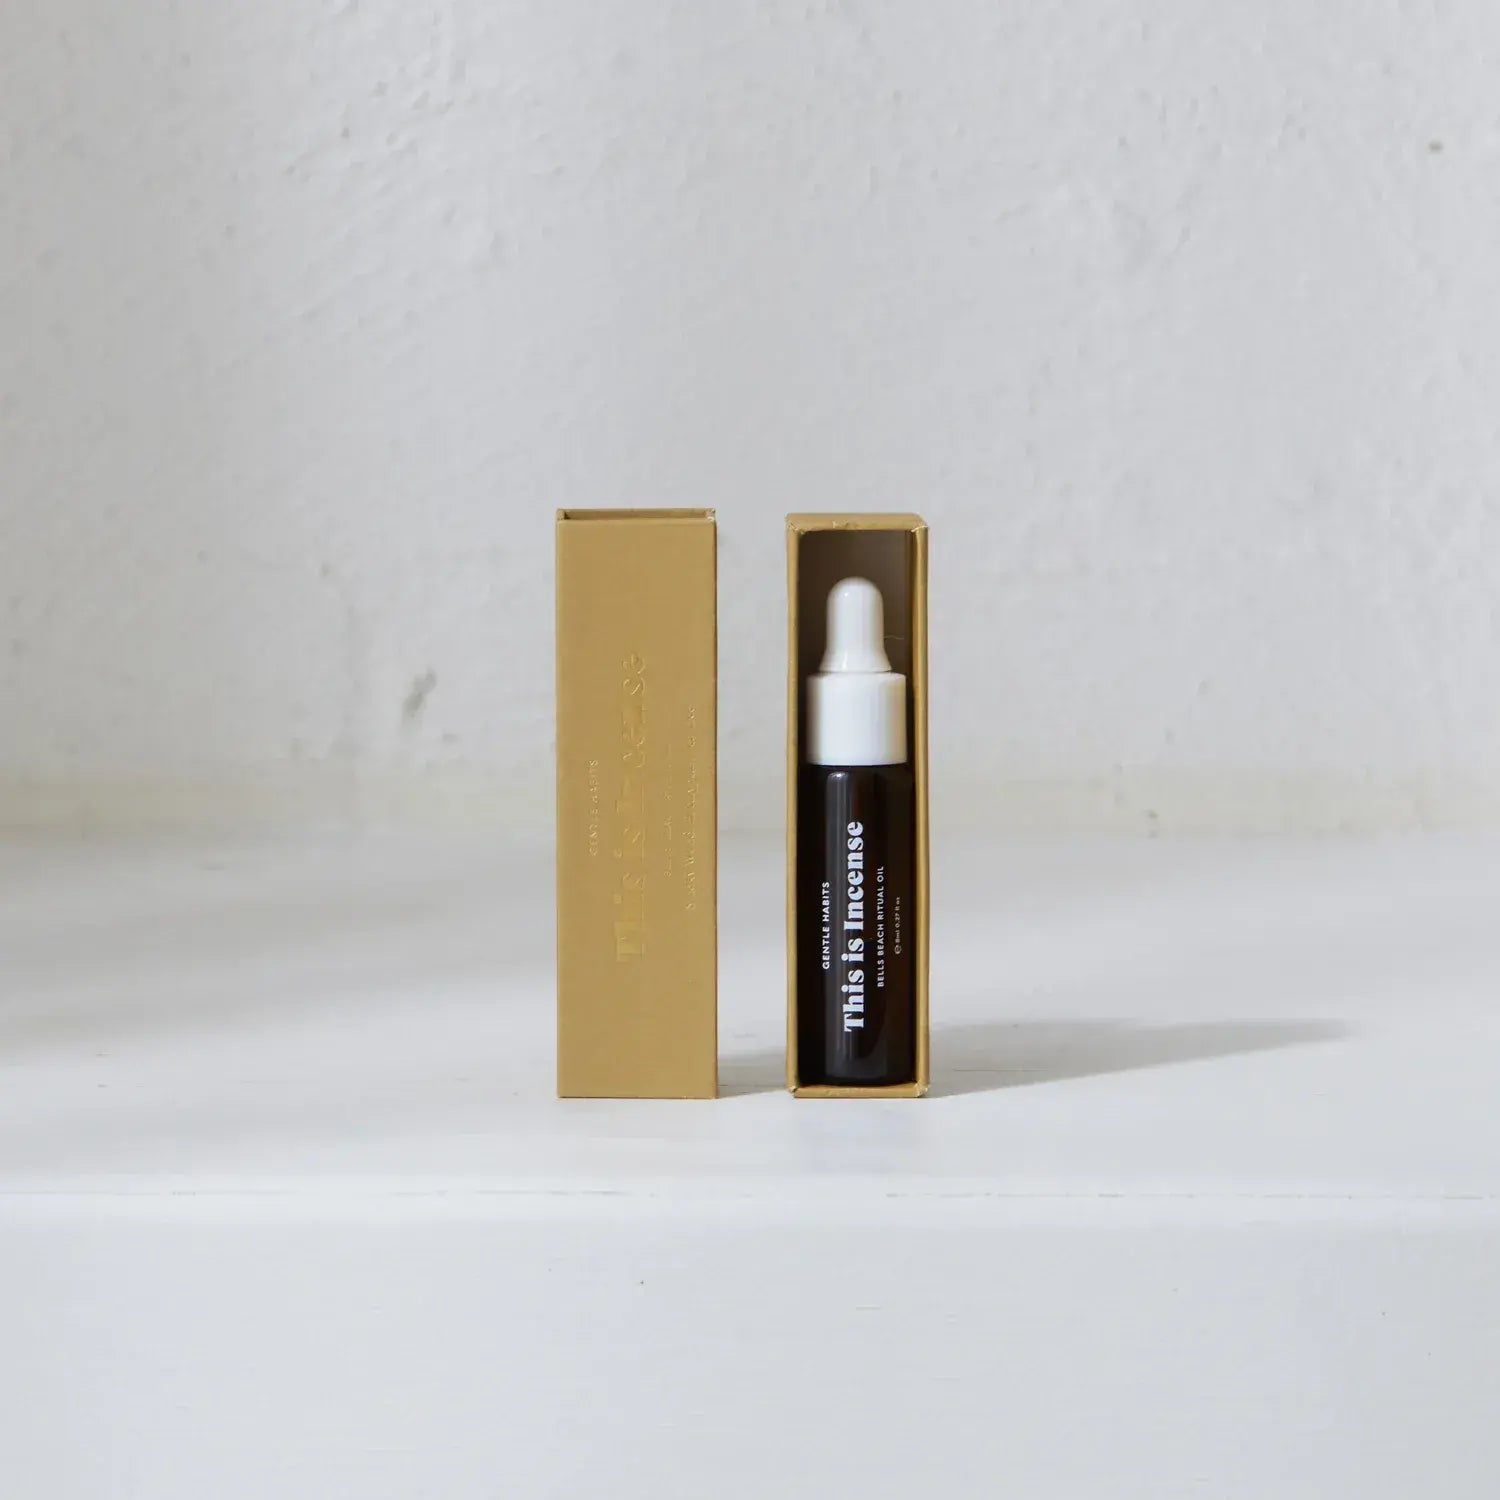 Essential Oil for diffuser by Gentle Habits - Bells Beach. Smoky Wood, Eucalyptus &amp; Tea Tree